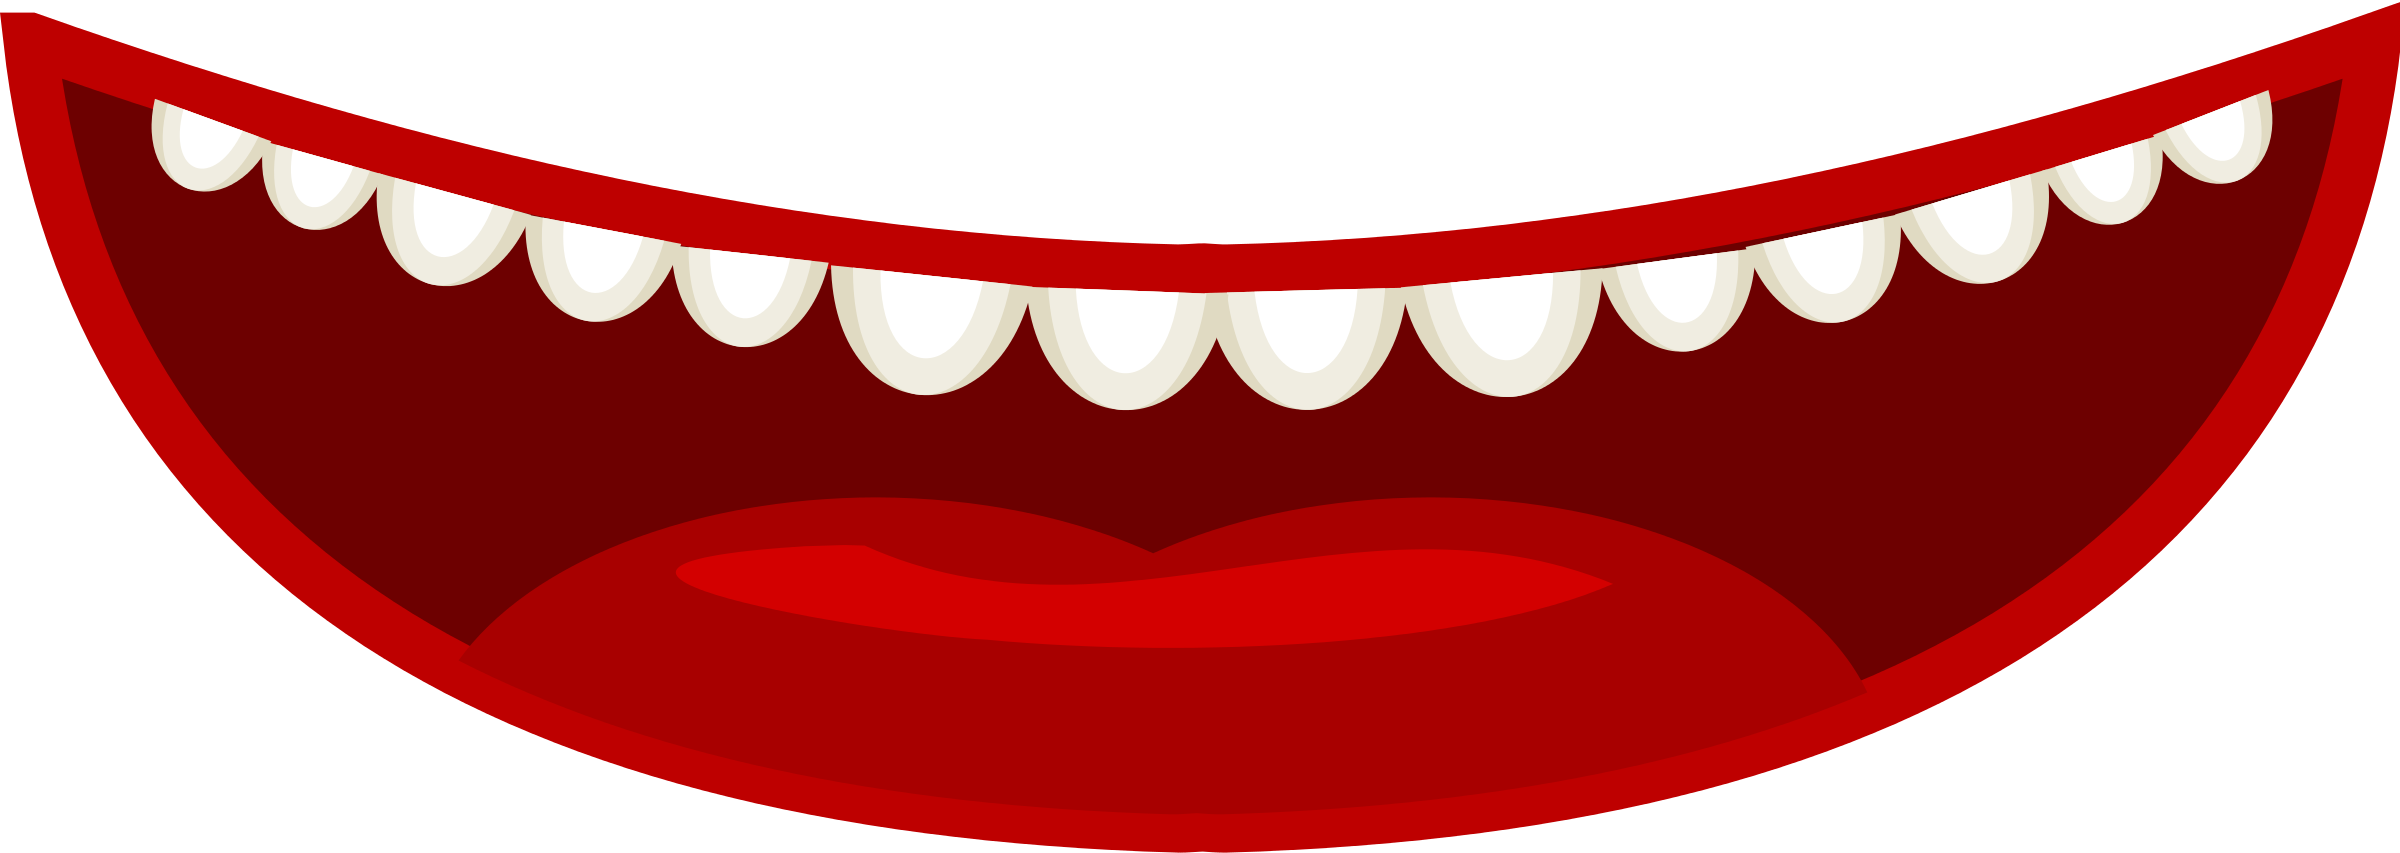 Open Mouth Teeth Transparent Image